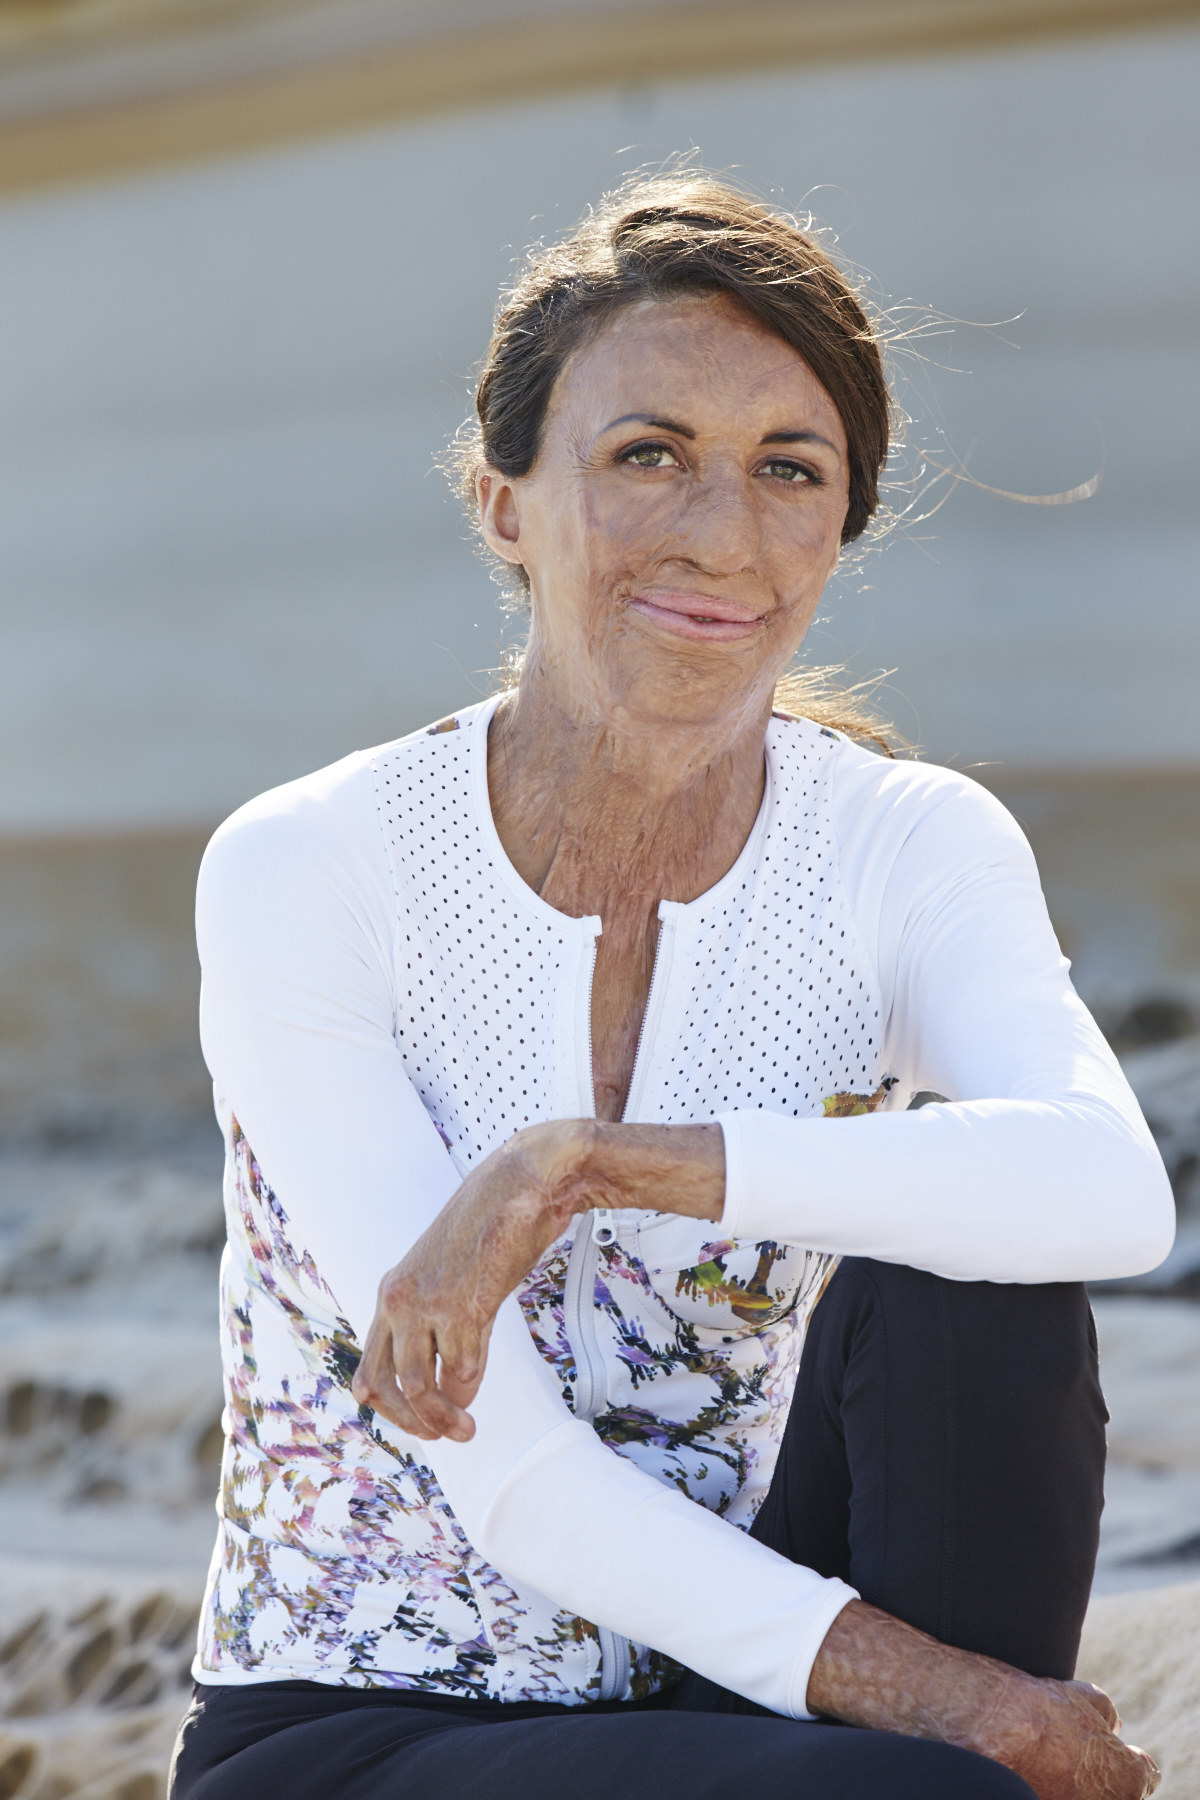 A Day in the Life of Turia Pitt